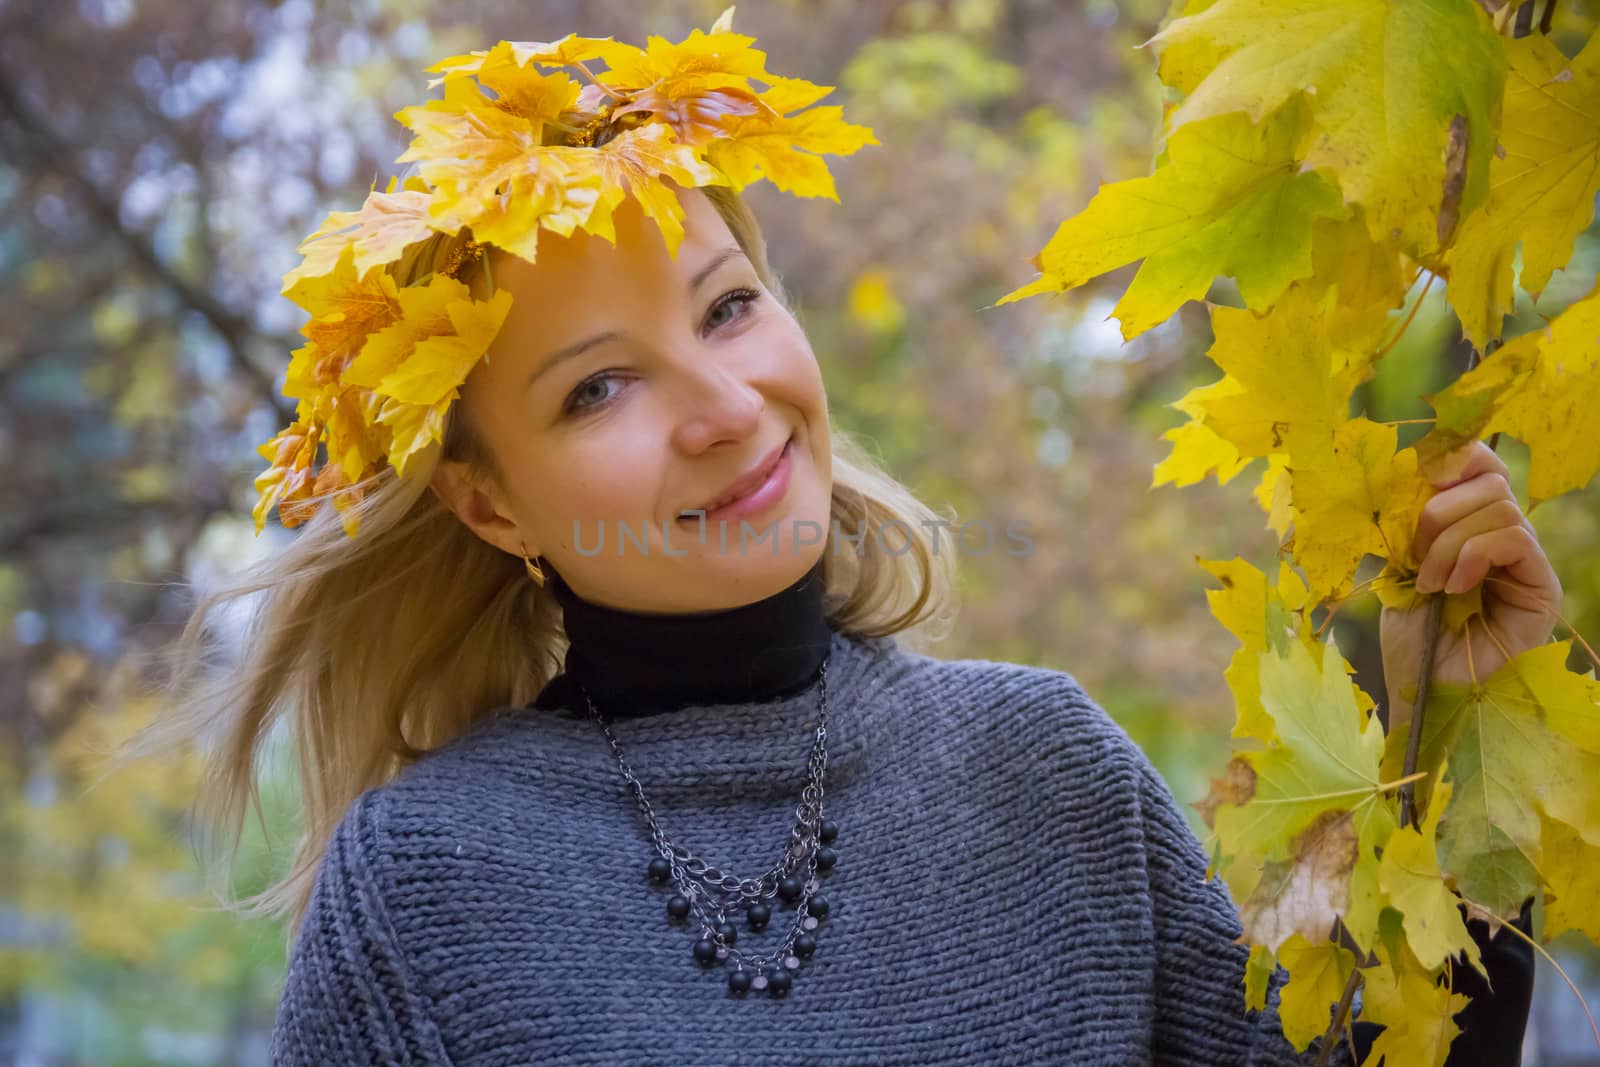 Autumn woman with crown of yellow maple leaves